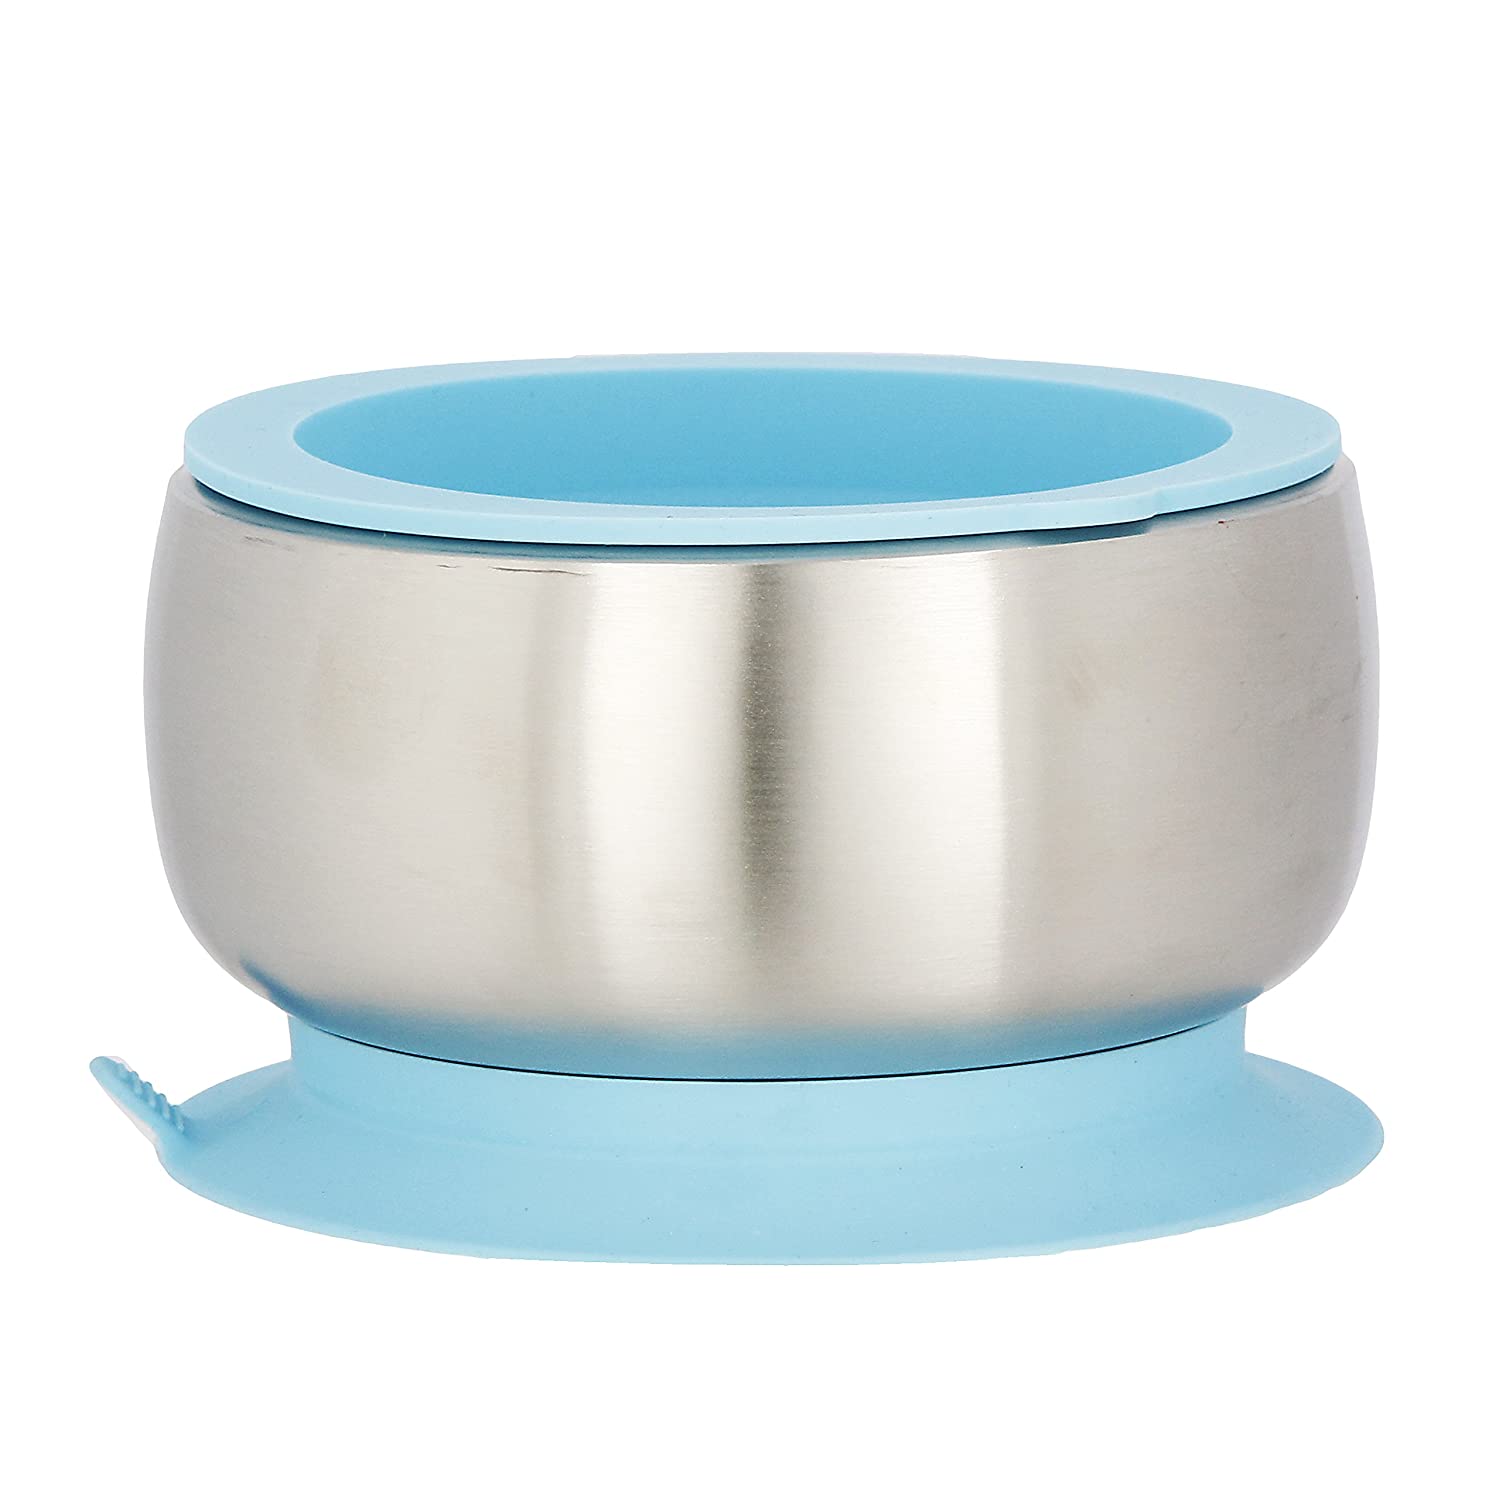 9 Best Baby Bowls and Plates 2023 - Buying Guide 6